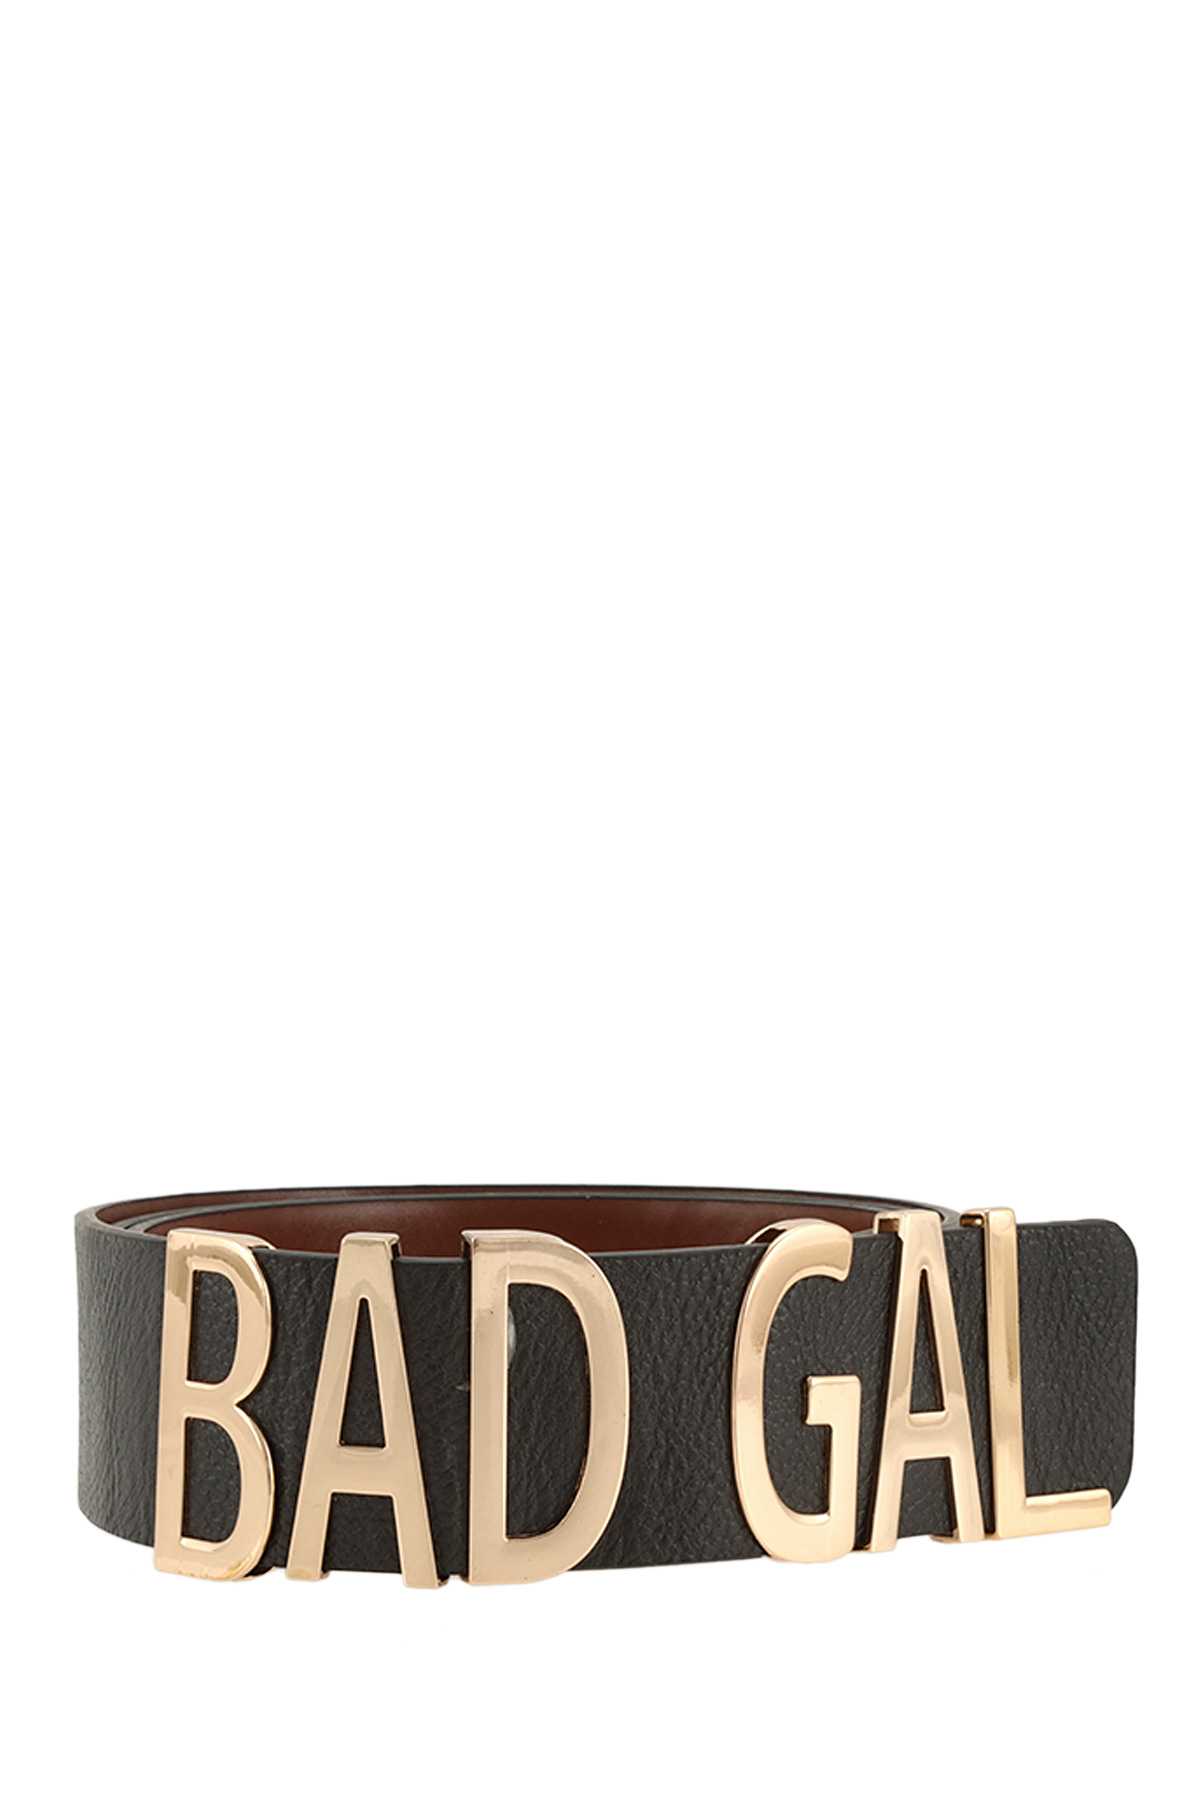 BAD GAL Buckle Faux Leather Belt